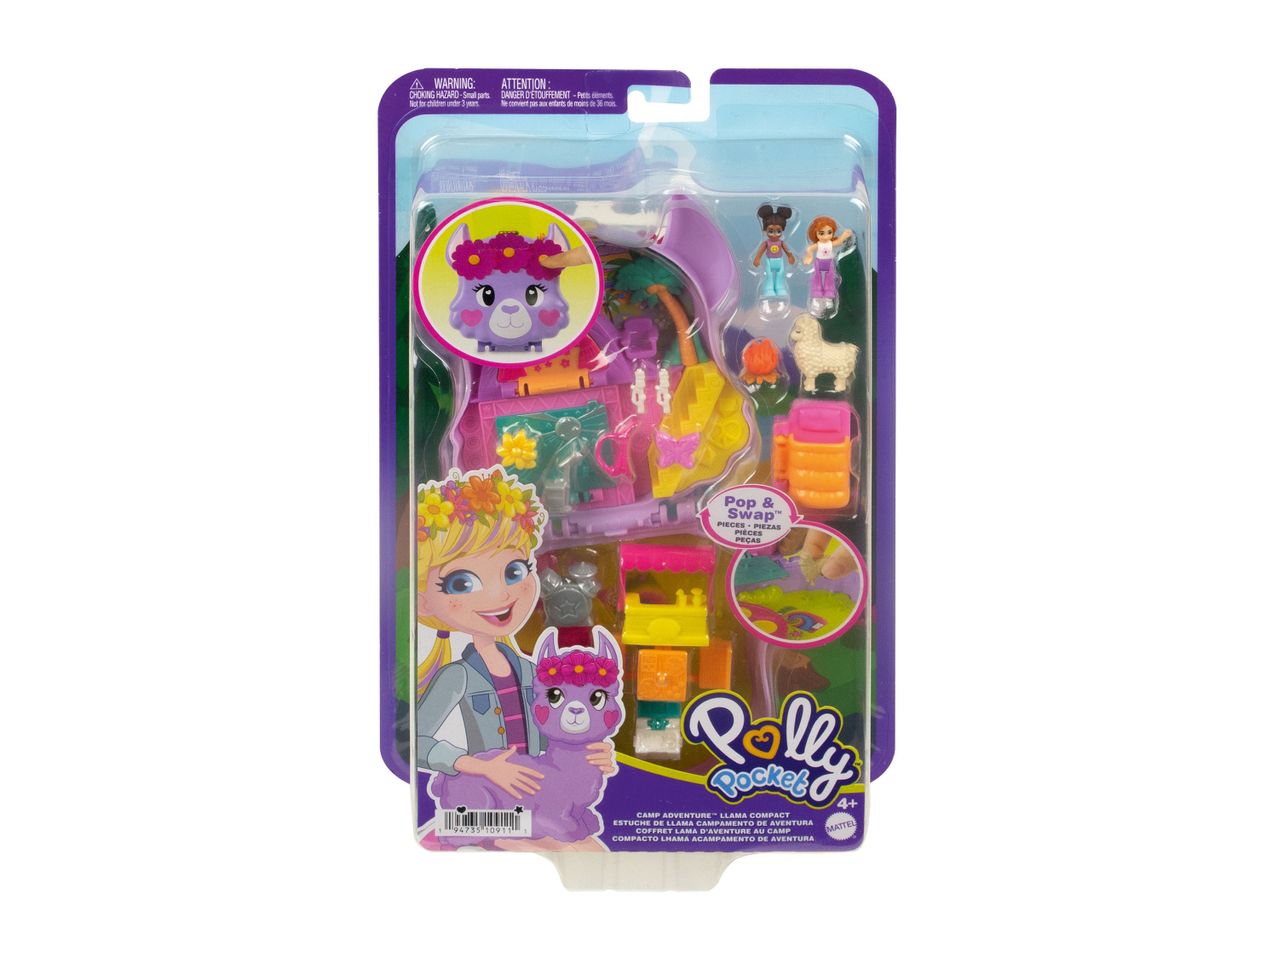 Go to full screen view: Polly Pocket Compact - Image 17